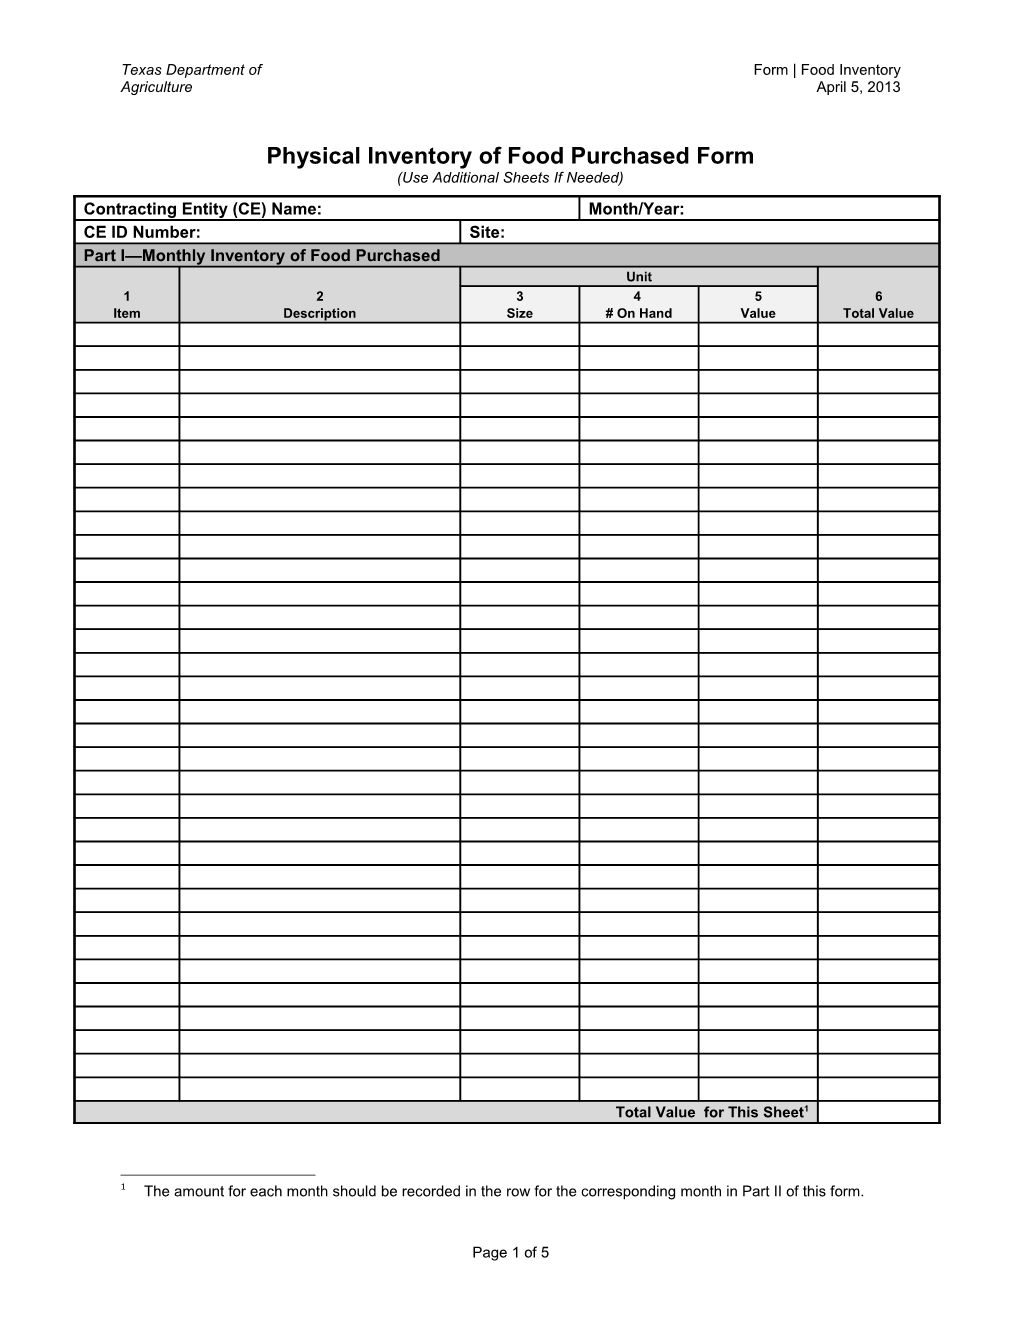 Physical Inventory of Food Purchased Form